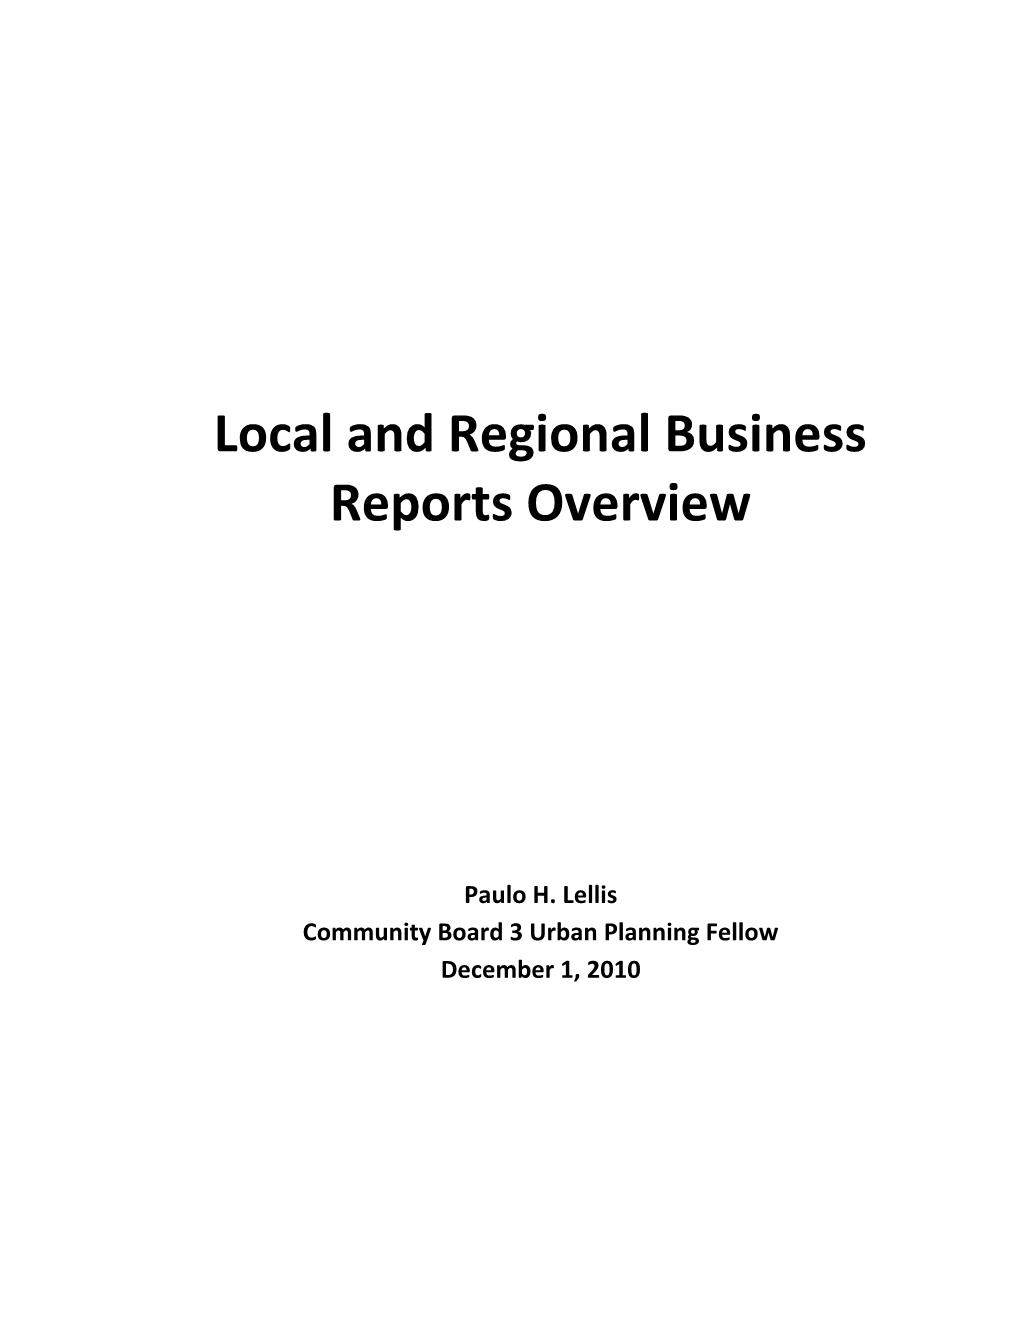 Local and Regional Business Reports Overview